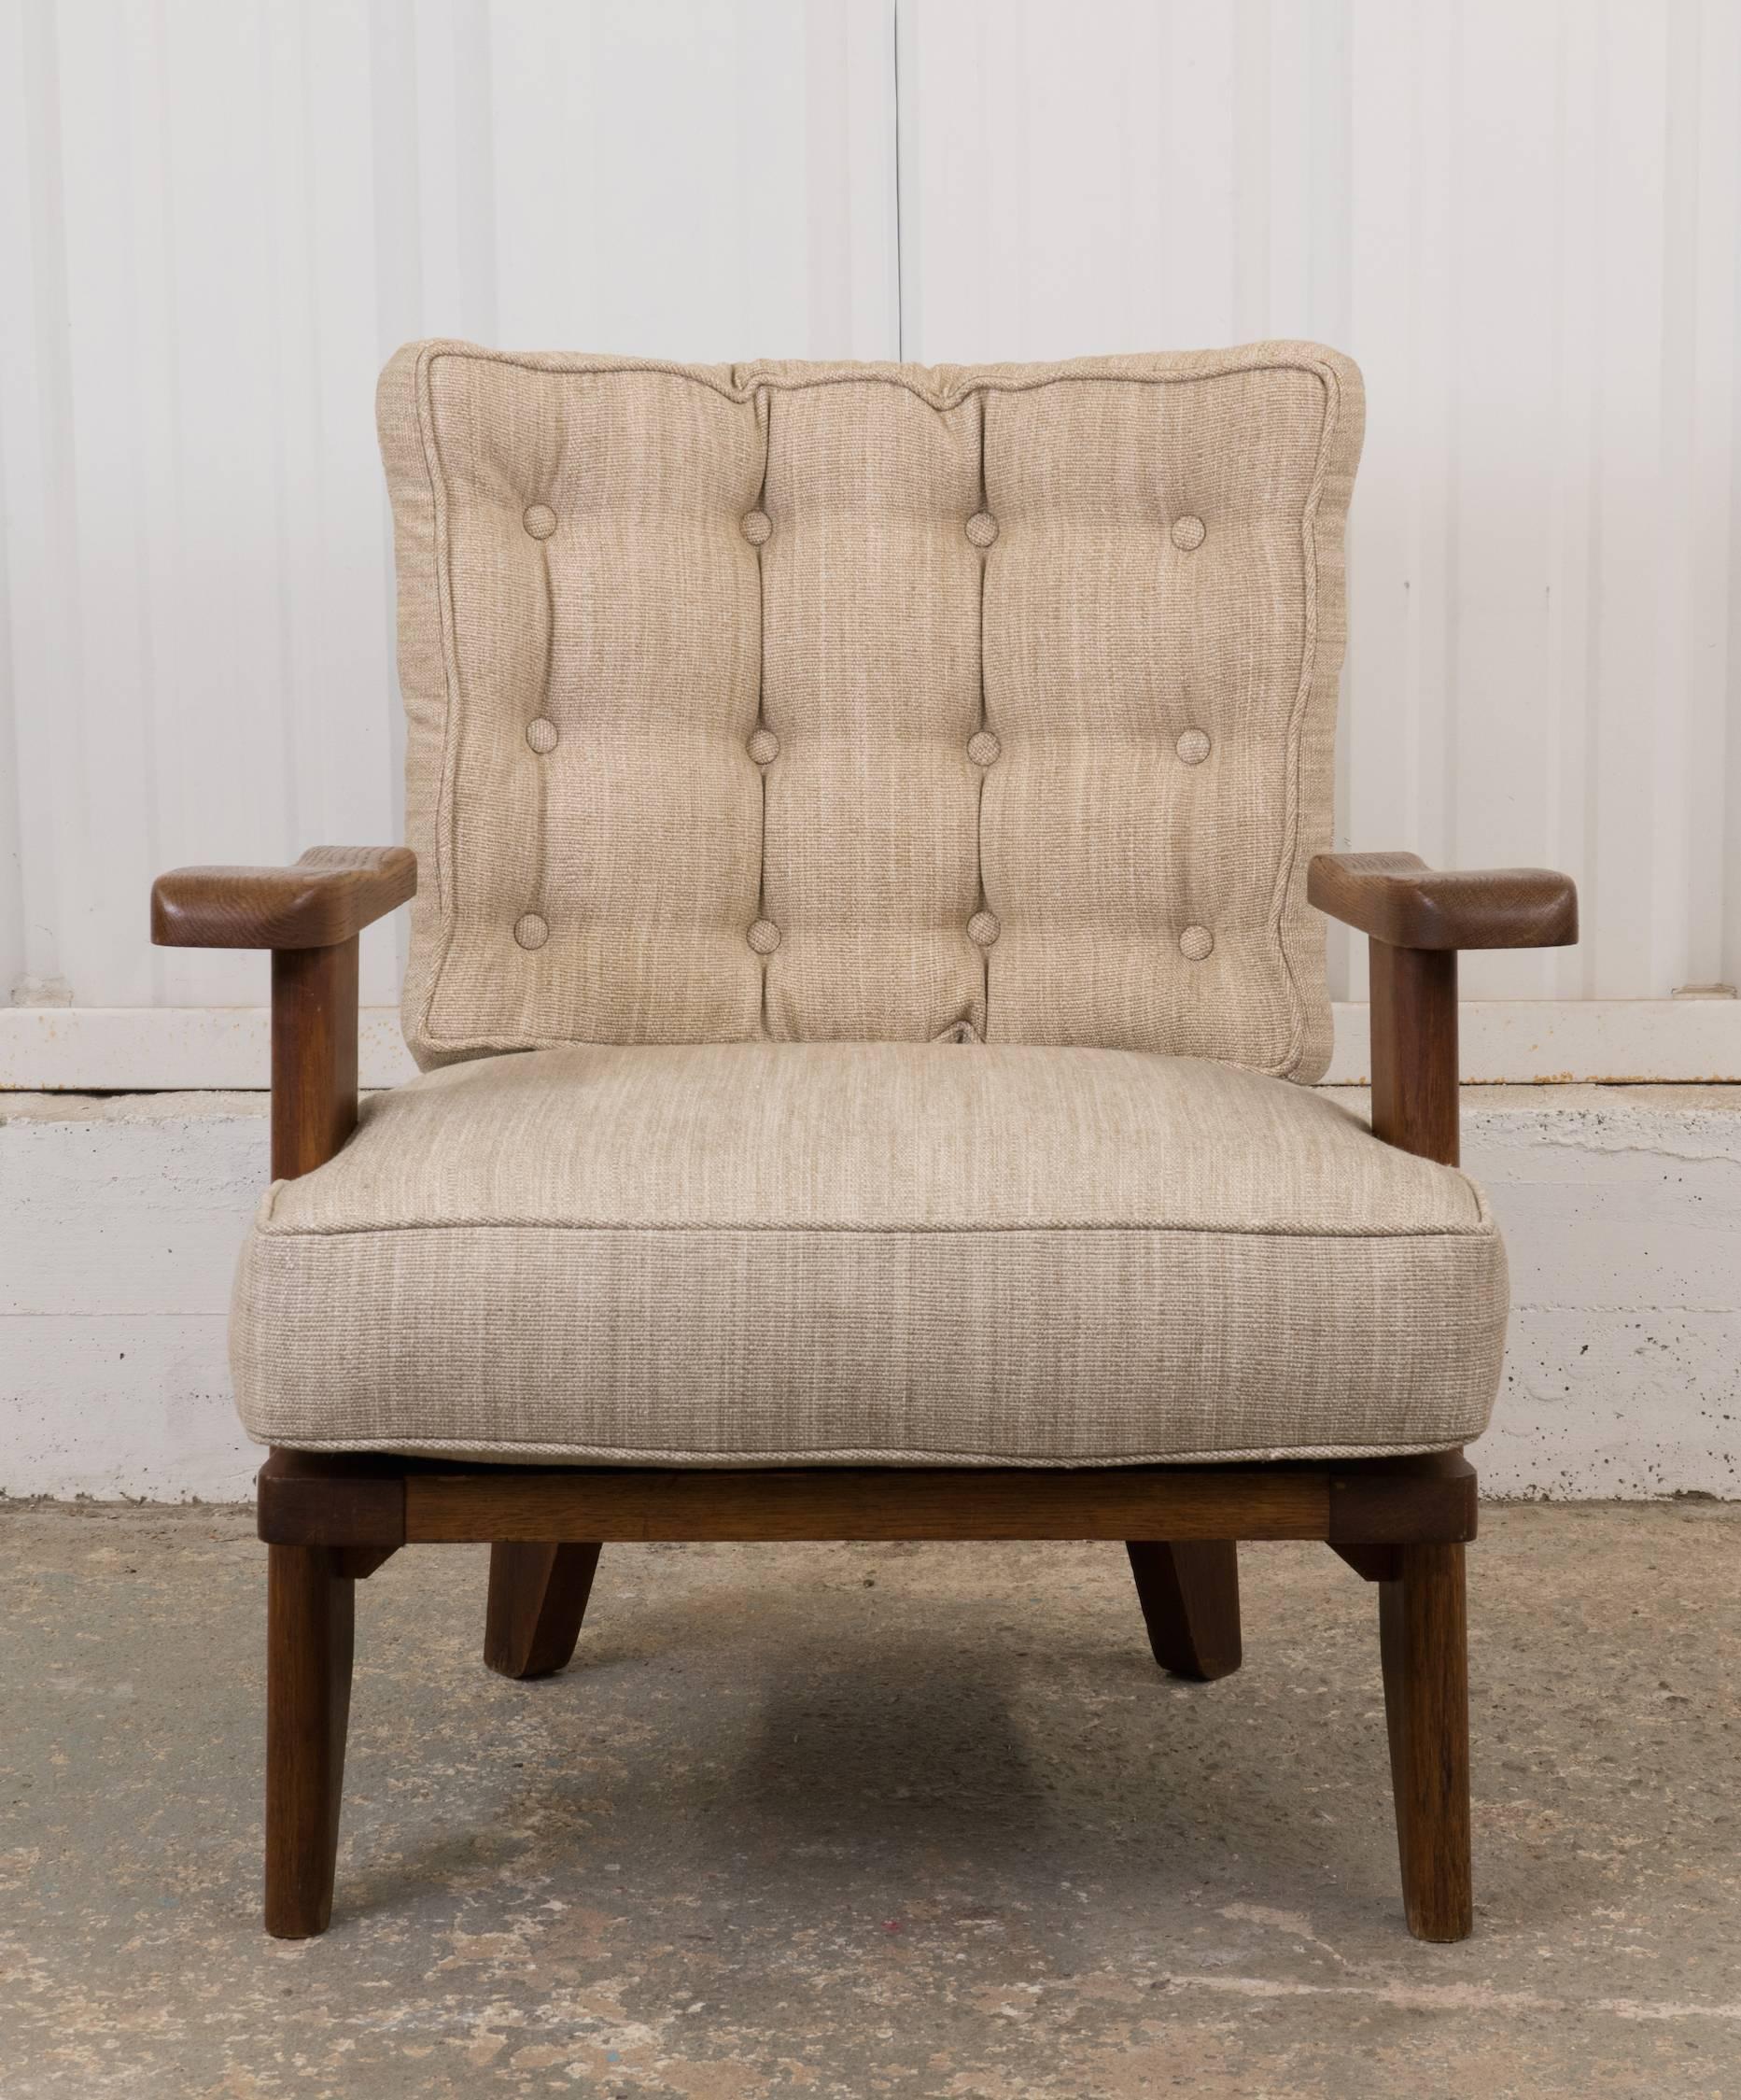 Small, single Guillerme et Chambron oak armchair, newly upholstered in a neutral fabric. One of the fun features of this chair is a hidden cup holder that swivels out when needed.